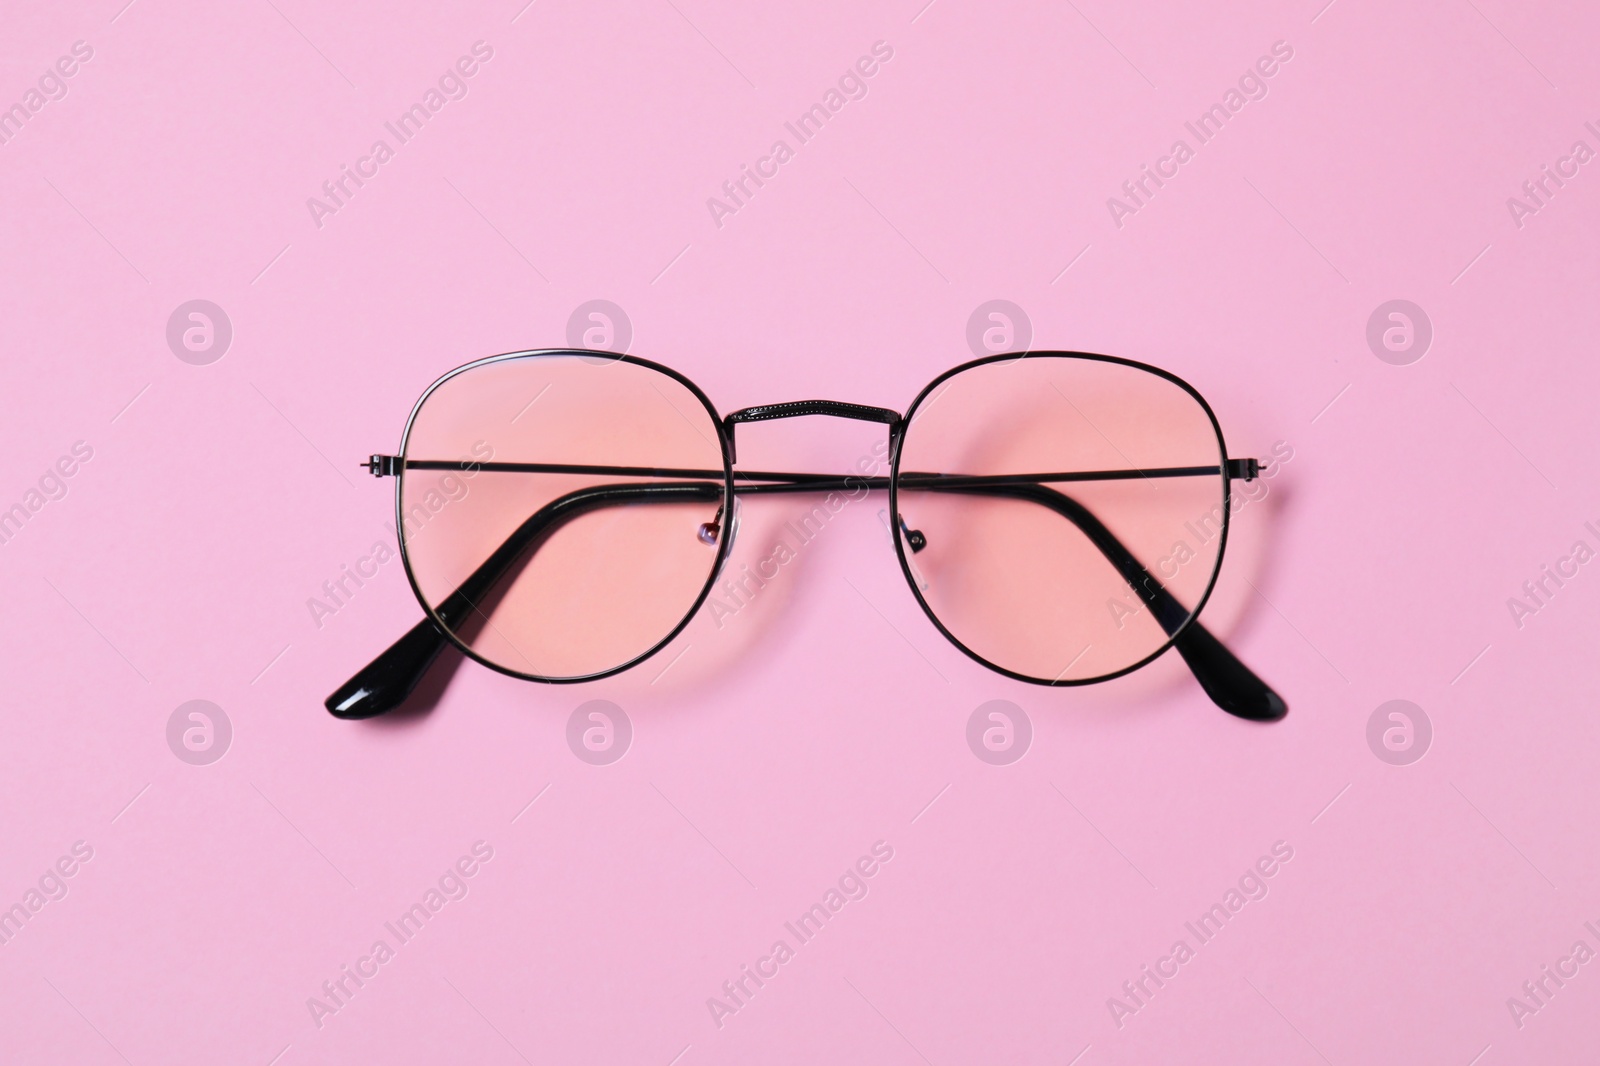 Photo of Stylish pair of glasses with black frame on pink background, top view